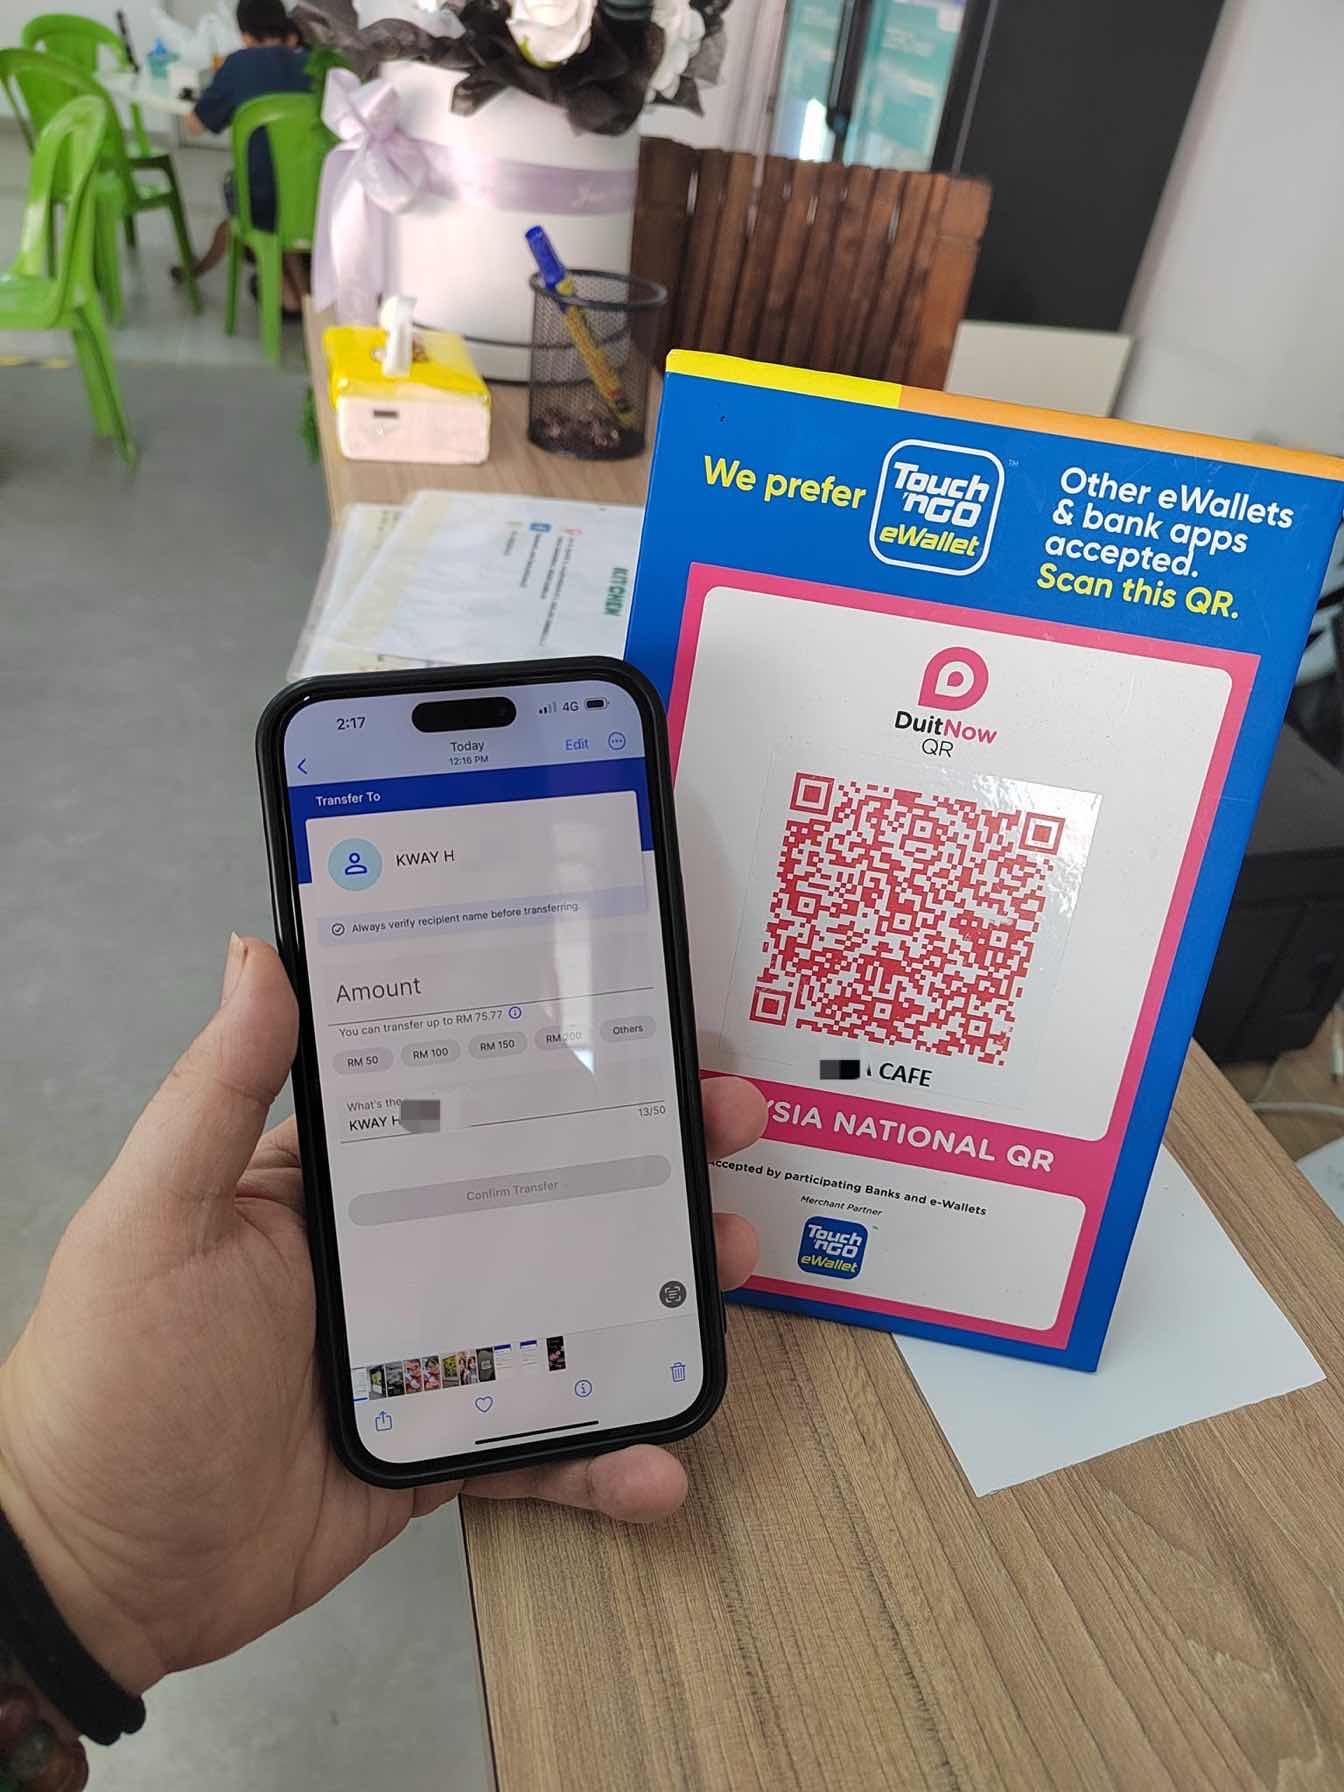 M'sian café owner stunned to find out counter's qr code swapped by someone in suspected scam